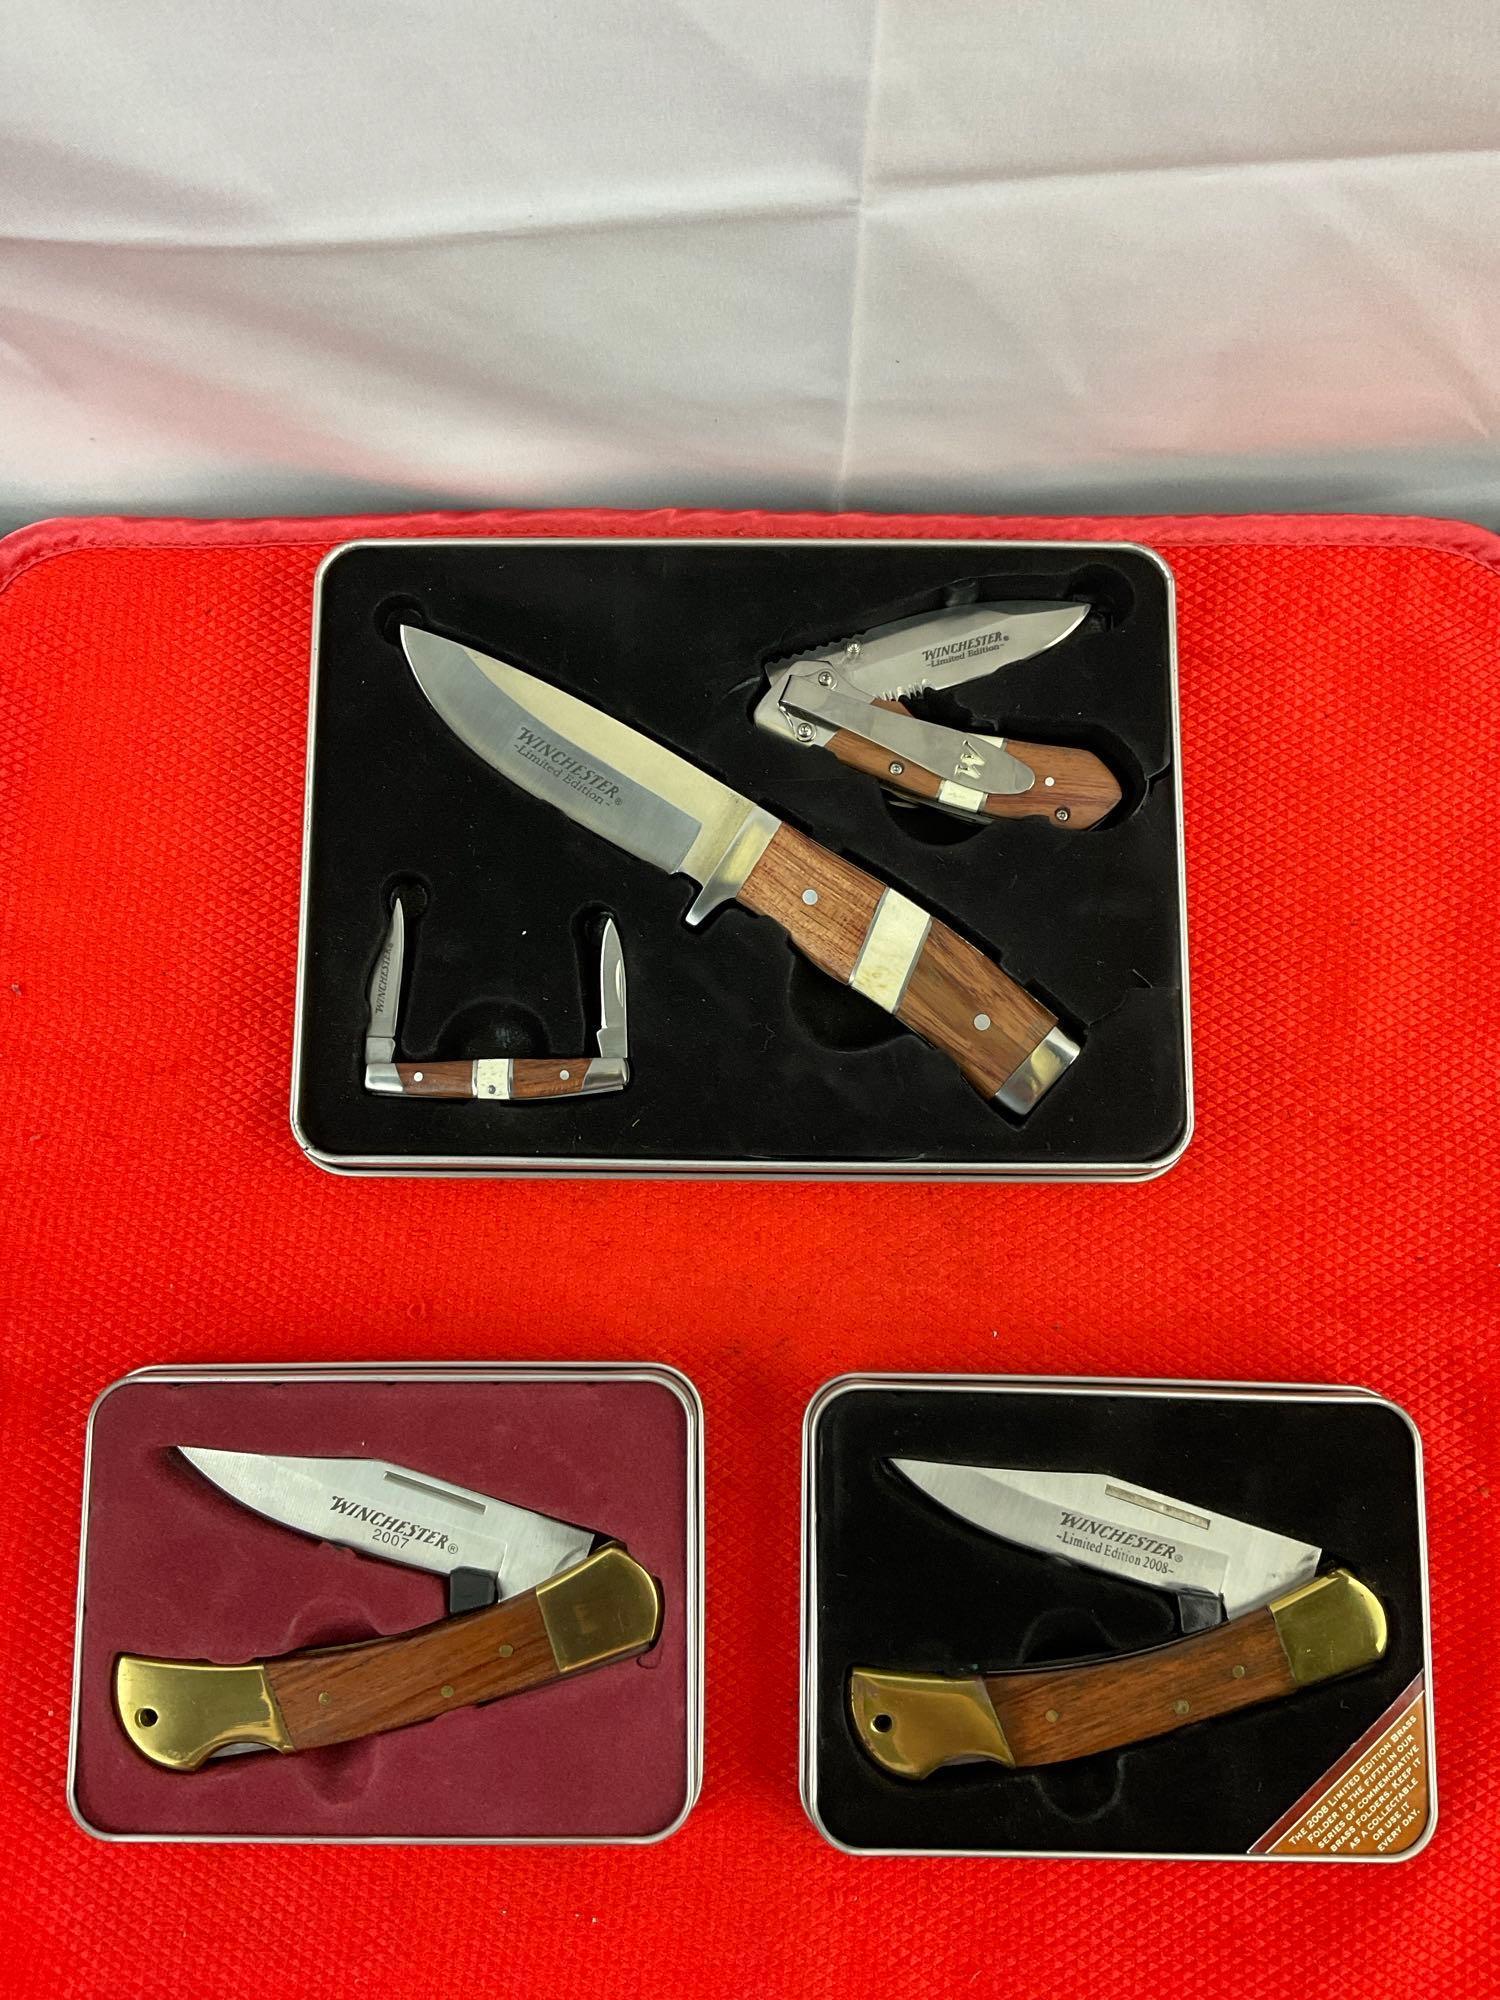 3 pcs Winchester Steel Hunting Knife Gift Box Sets. 5 Knives in 3 Tin Boxes. Ltd Ed 2007, 2008. See